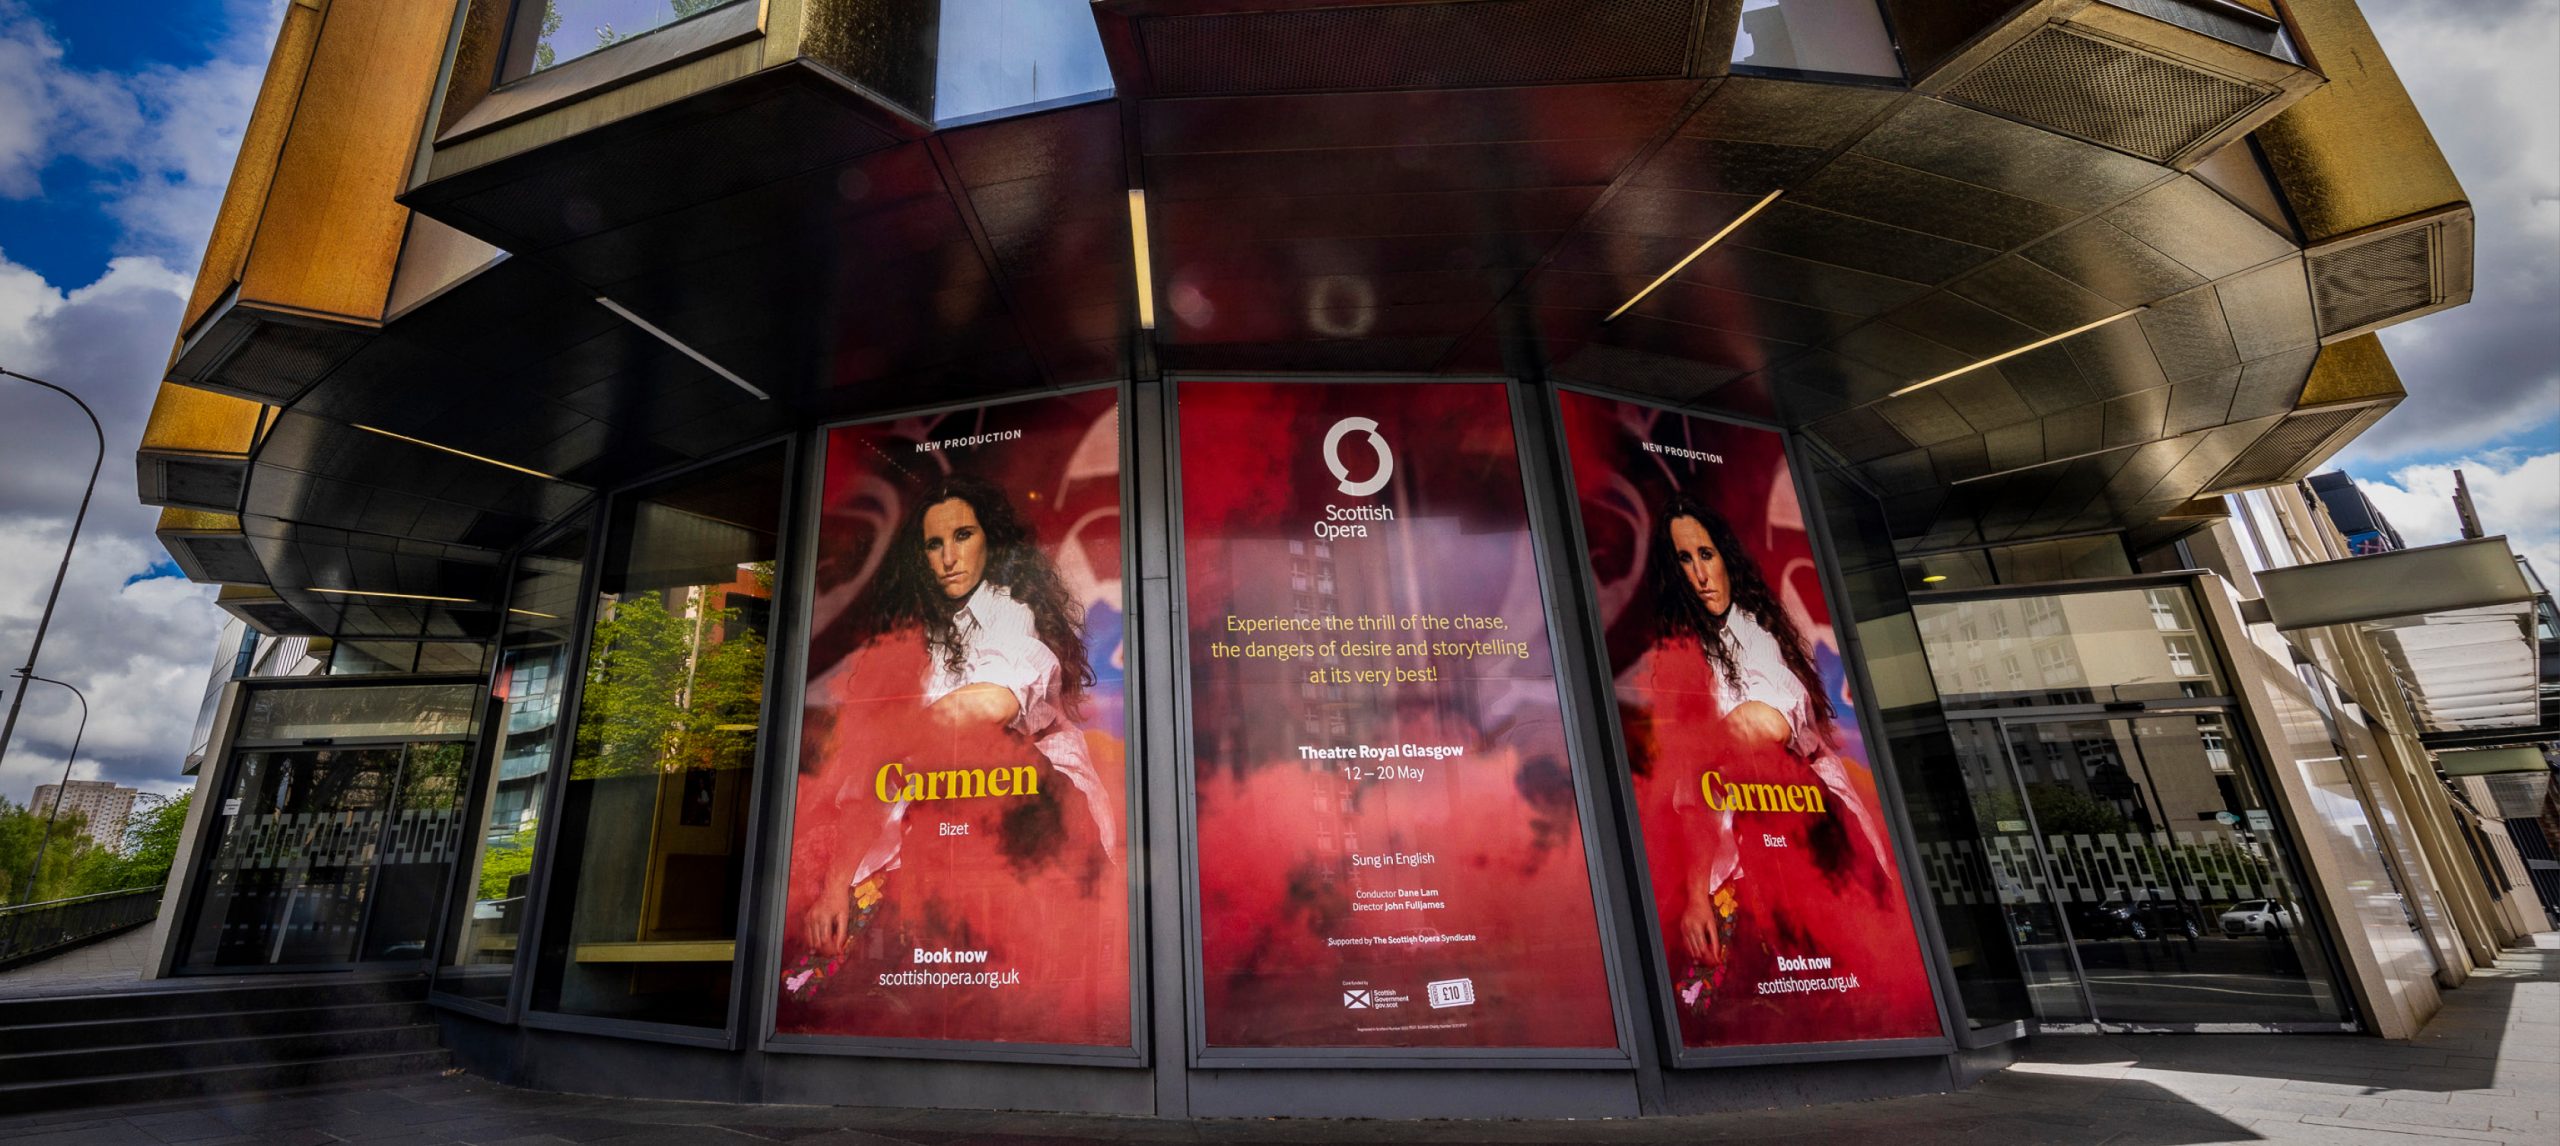 Campaign artwork for an opera called 'Carmen' installed on the outside windows of the Theatre Royal Glasgow.